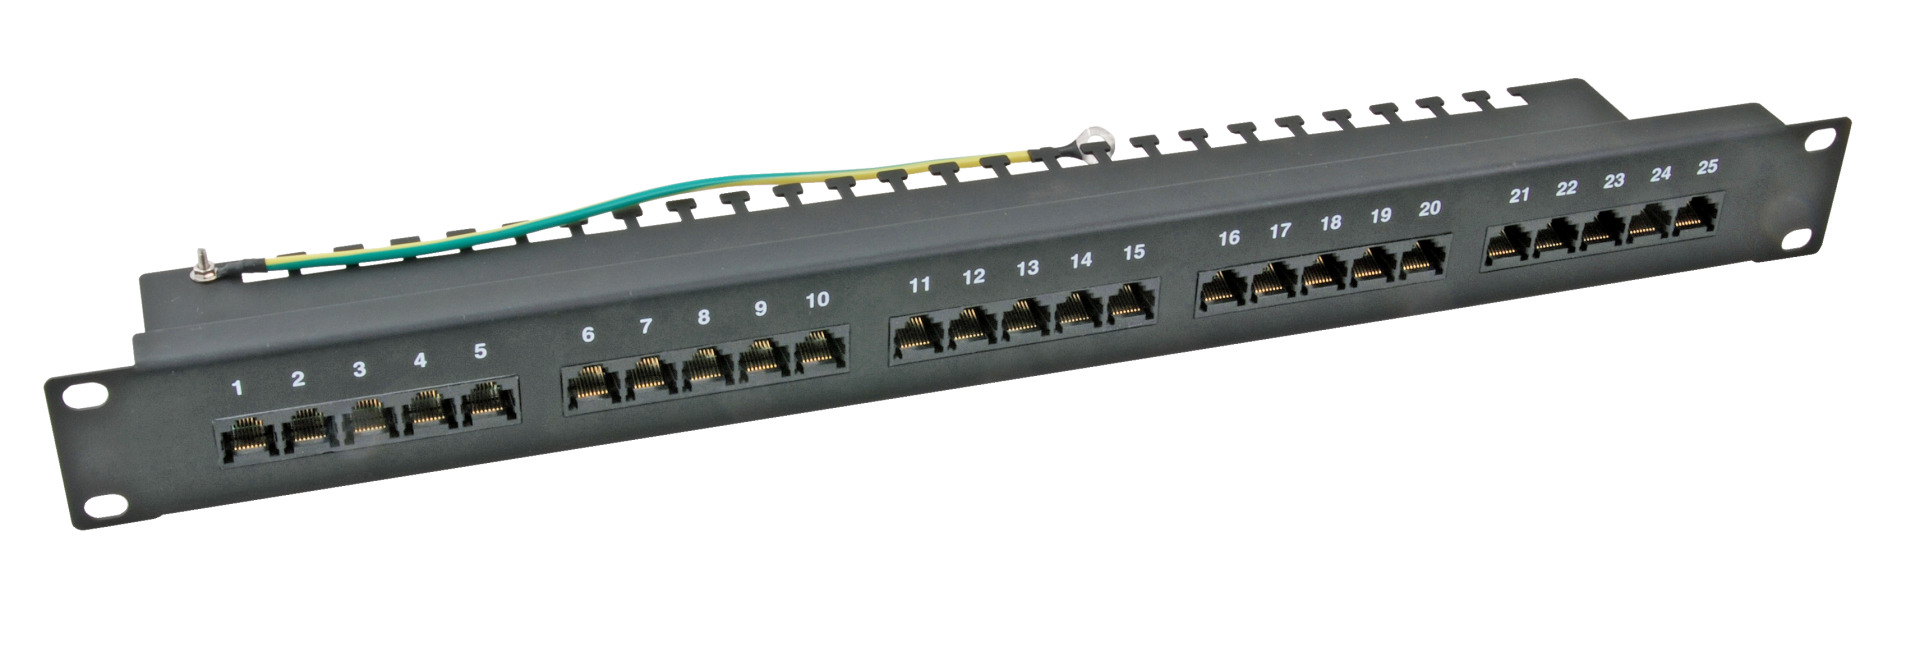 Patch Panel 25 x RJ45 8/4 1HE ISDN, RAL7035, Cat. 3